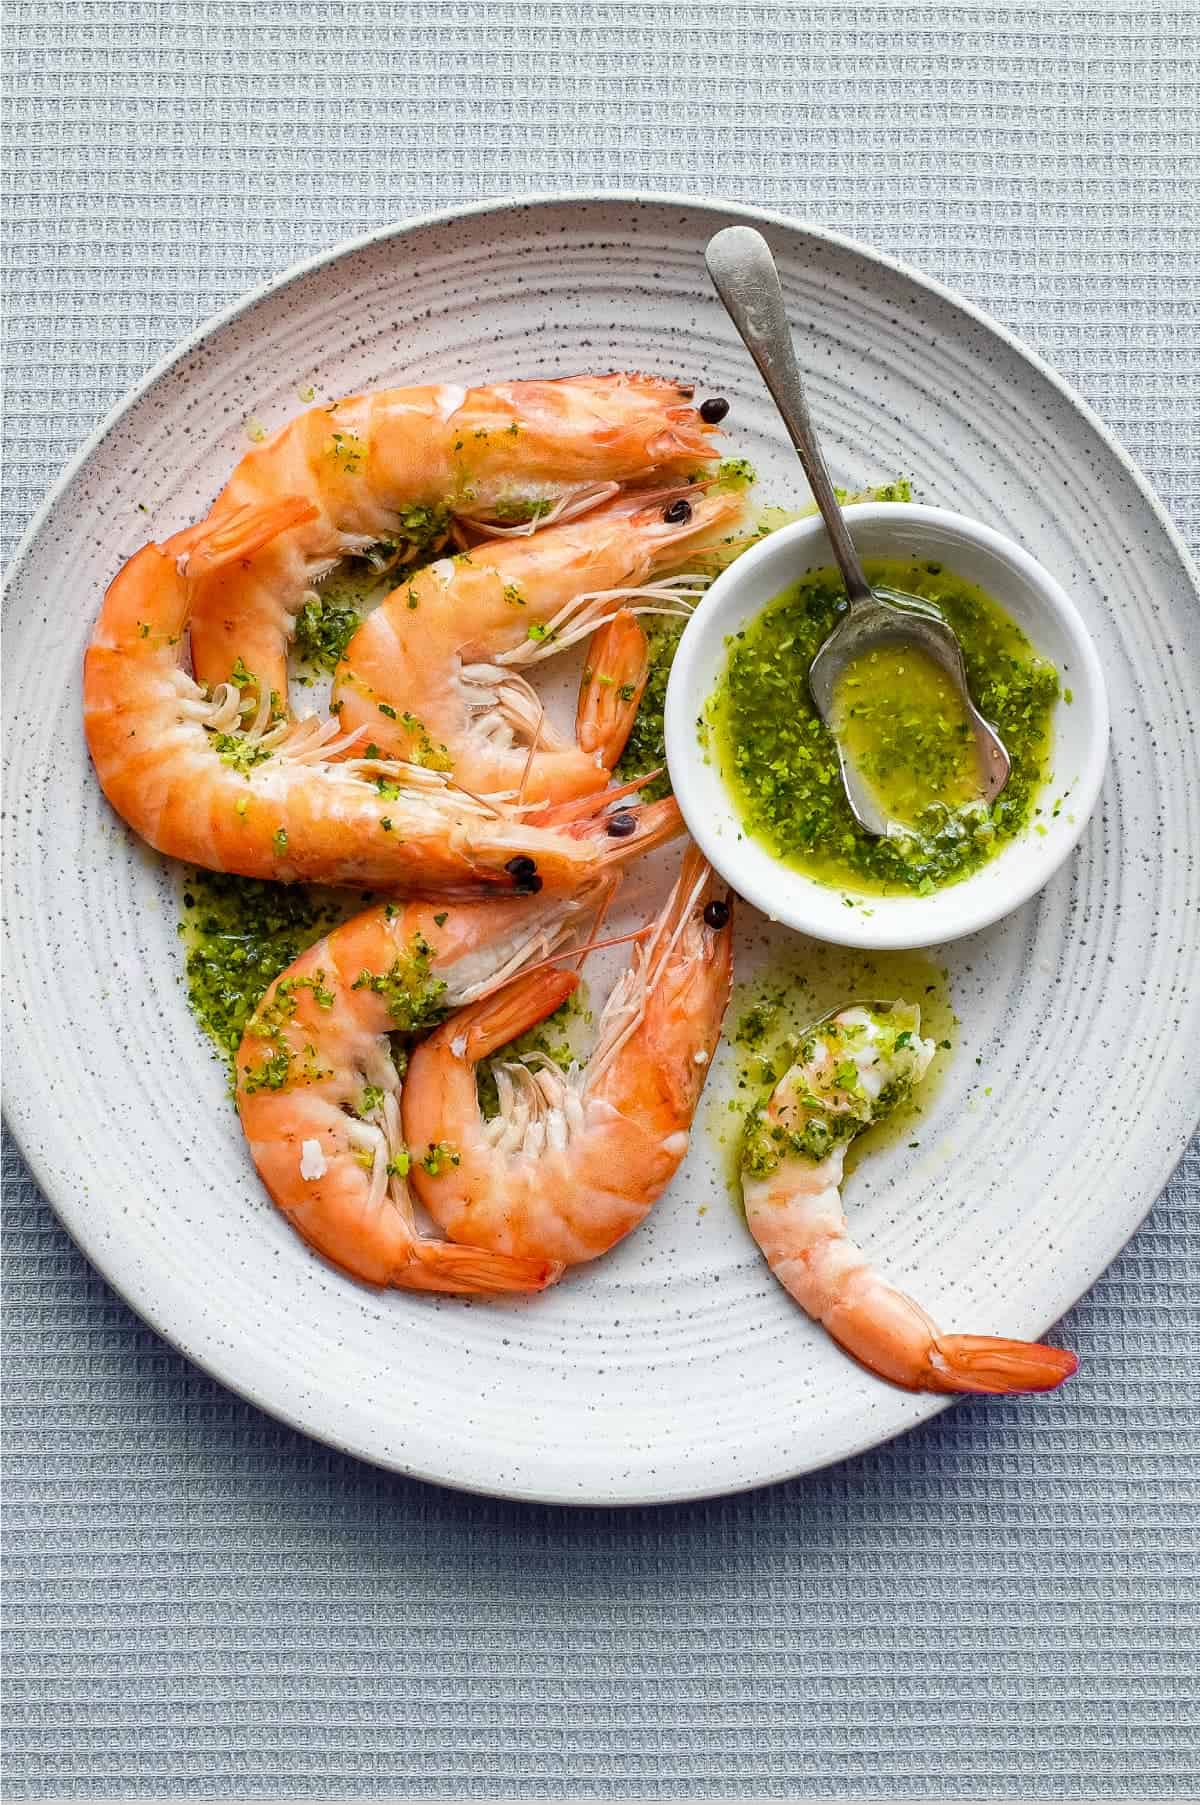 A platter of King Prawns with a small bowl of Italian Salmoriglio sauce, a herb and lemon dressing. A small spoon sits in the bowl.